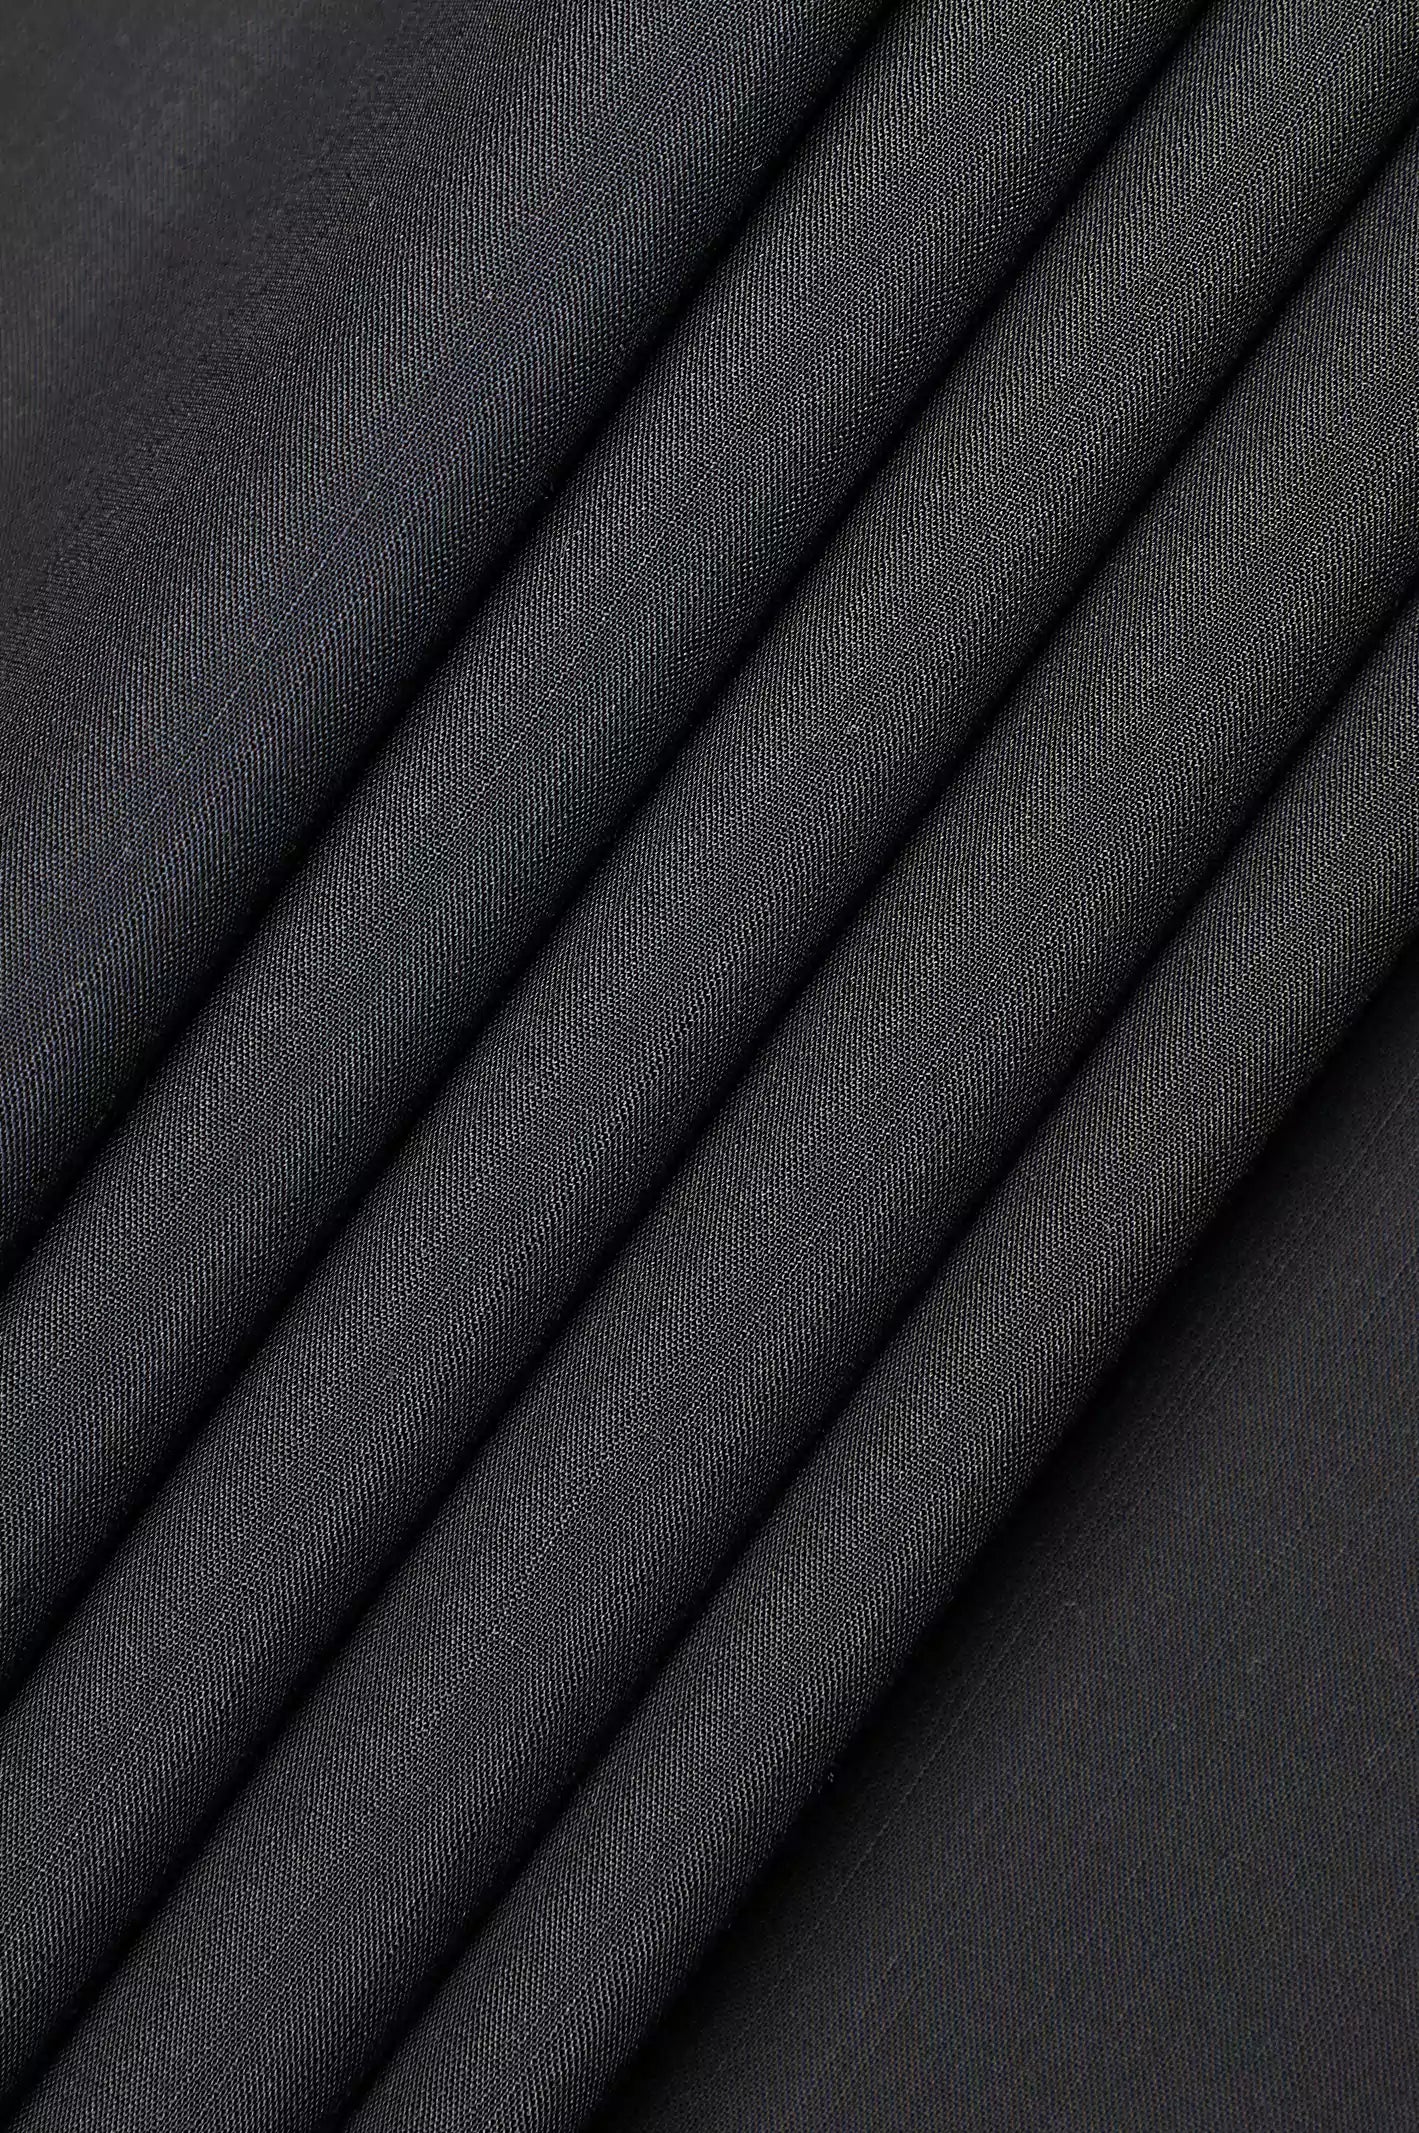 Black Unstitched Fabric Suit From Diners